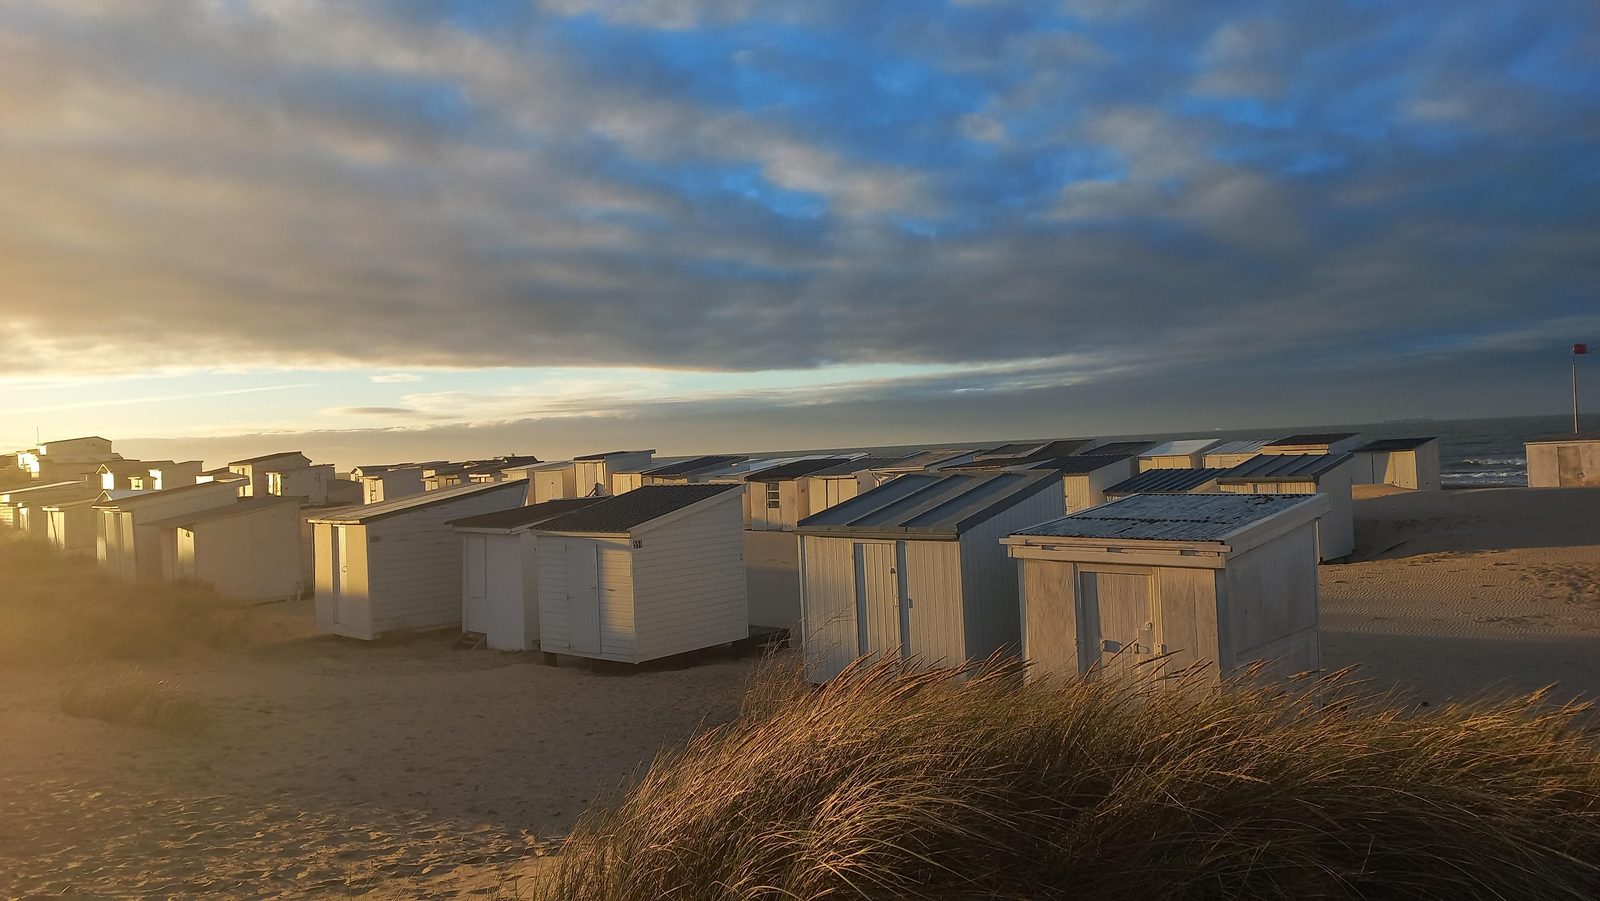 Find out what to do in Calais, France and stay at our holiday residences 